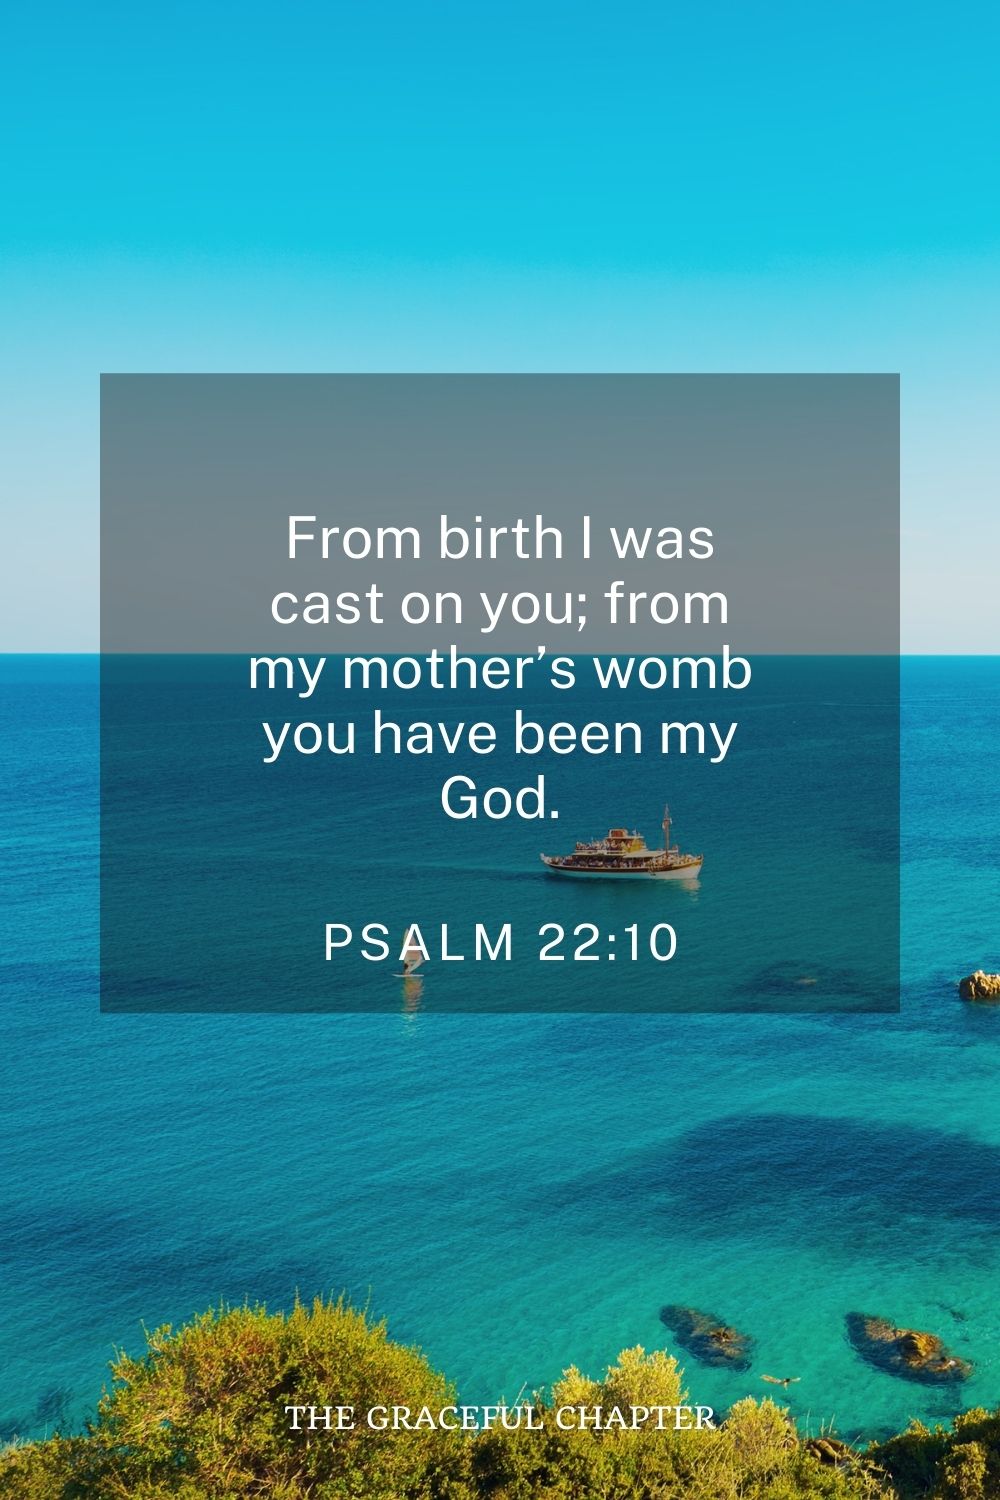 From birth I was cast on you; from my mother’s womb you have been my God. Psalm 22:10